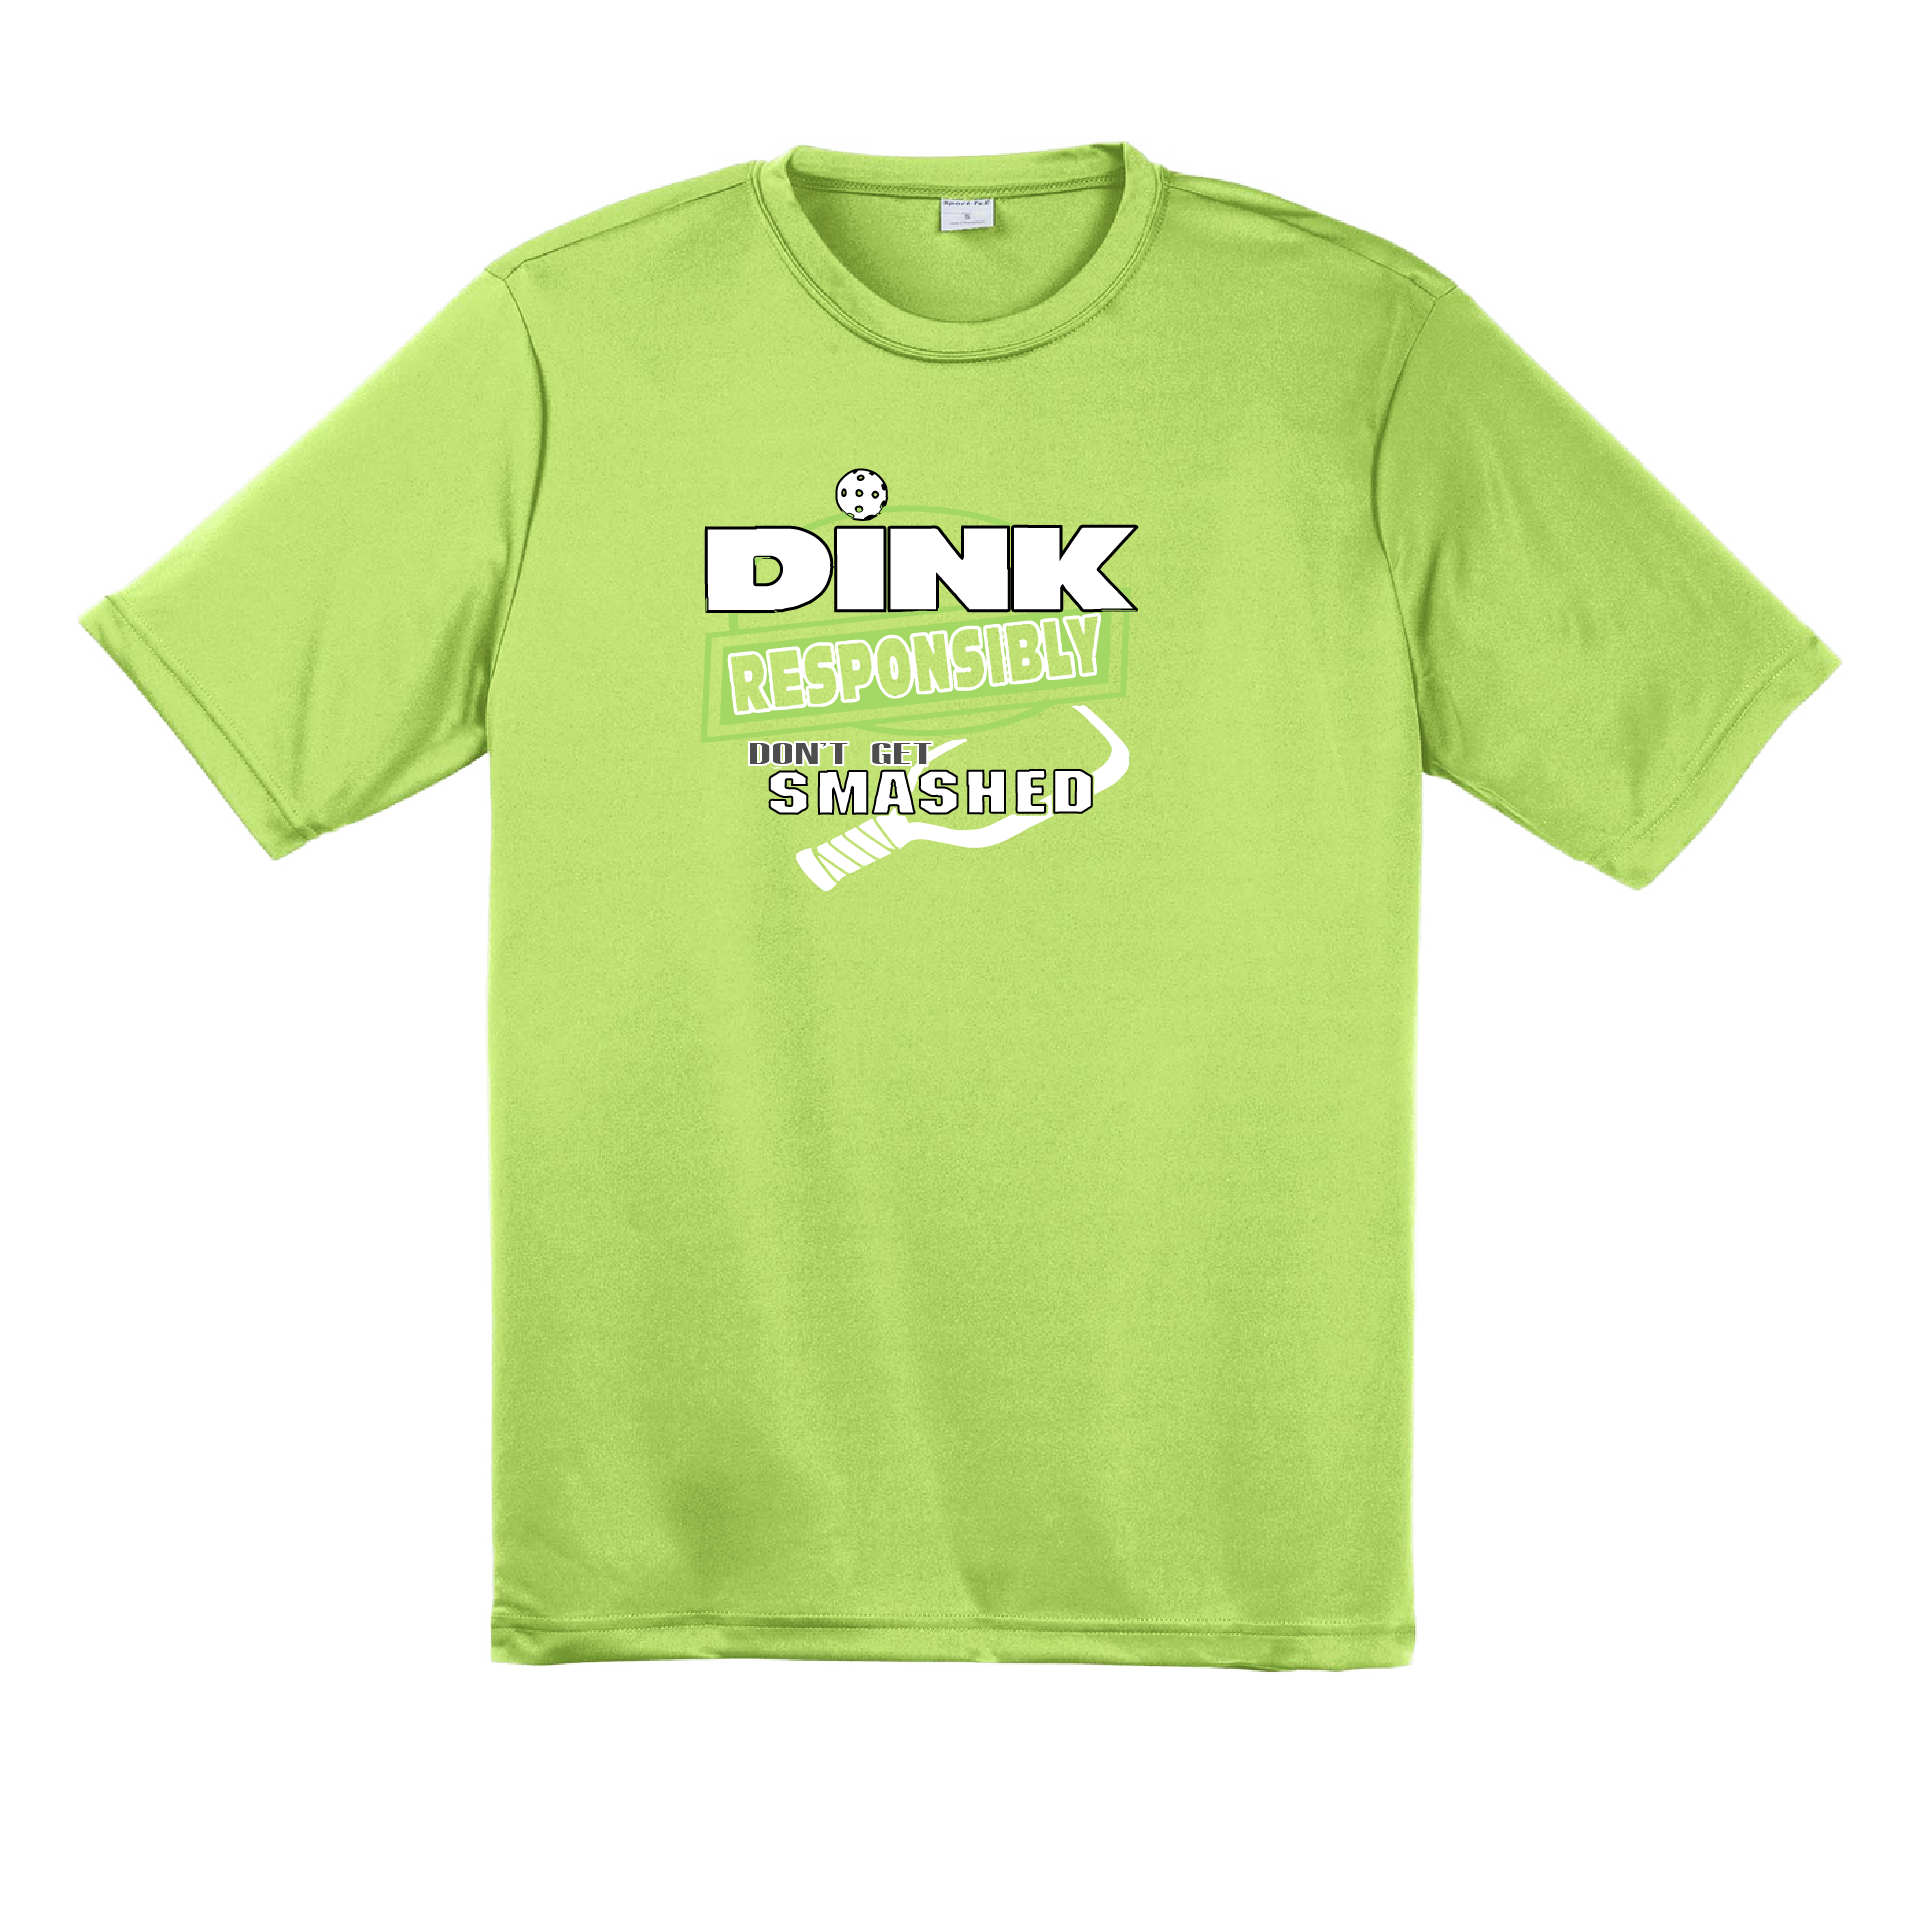 Pickleball Design: Dink Responsibly - Don't Get Smashed  Men's Style: Short Sleeved   Shirts are lightweight, roomy and highly breathable. These moisture-wicking shirts are designed for athletic performance. They feature PosiCharge technology to lock in color and prevent logos from fading. Removable tag and set-in sleeves for comfort.